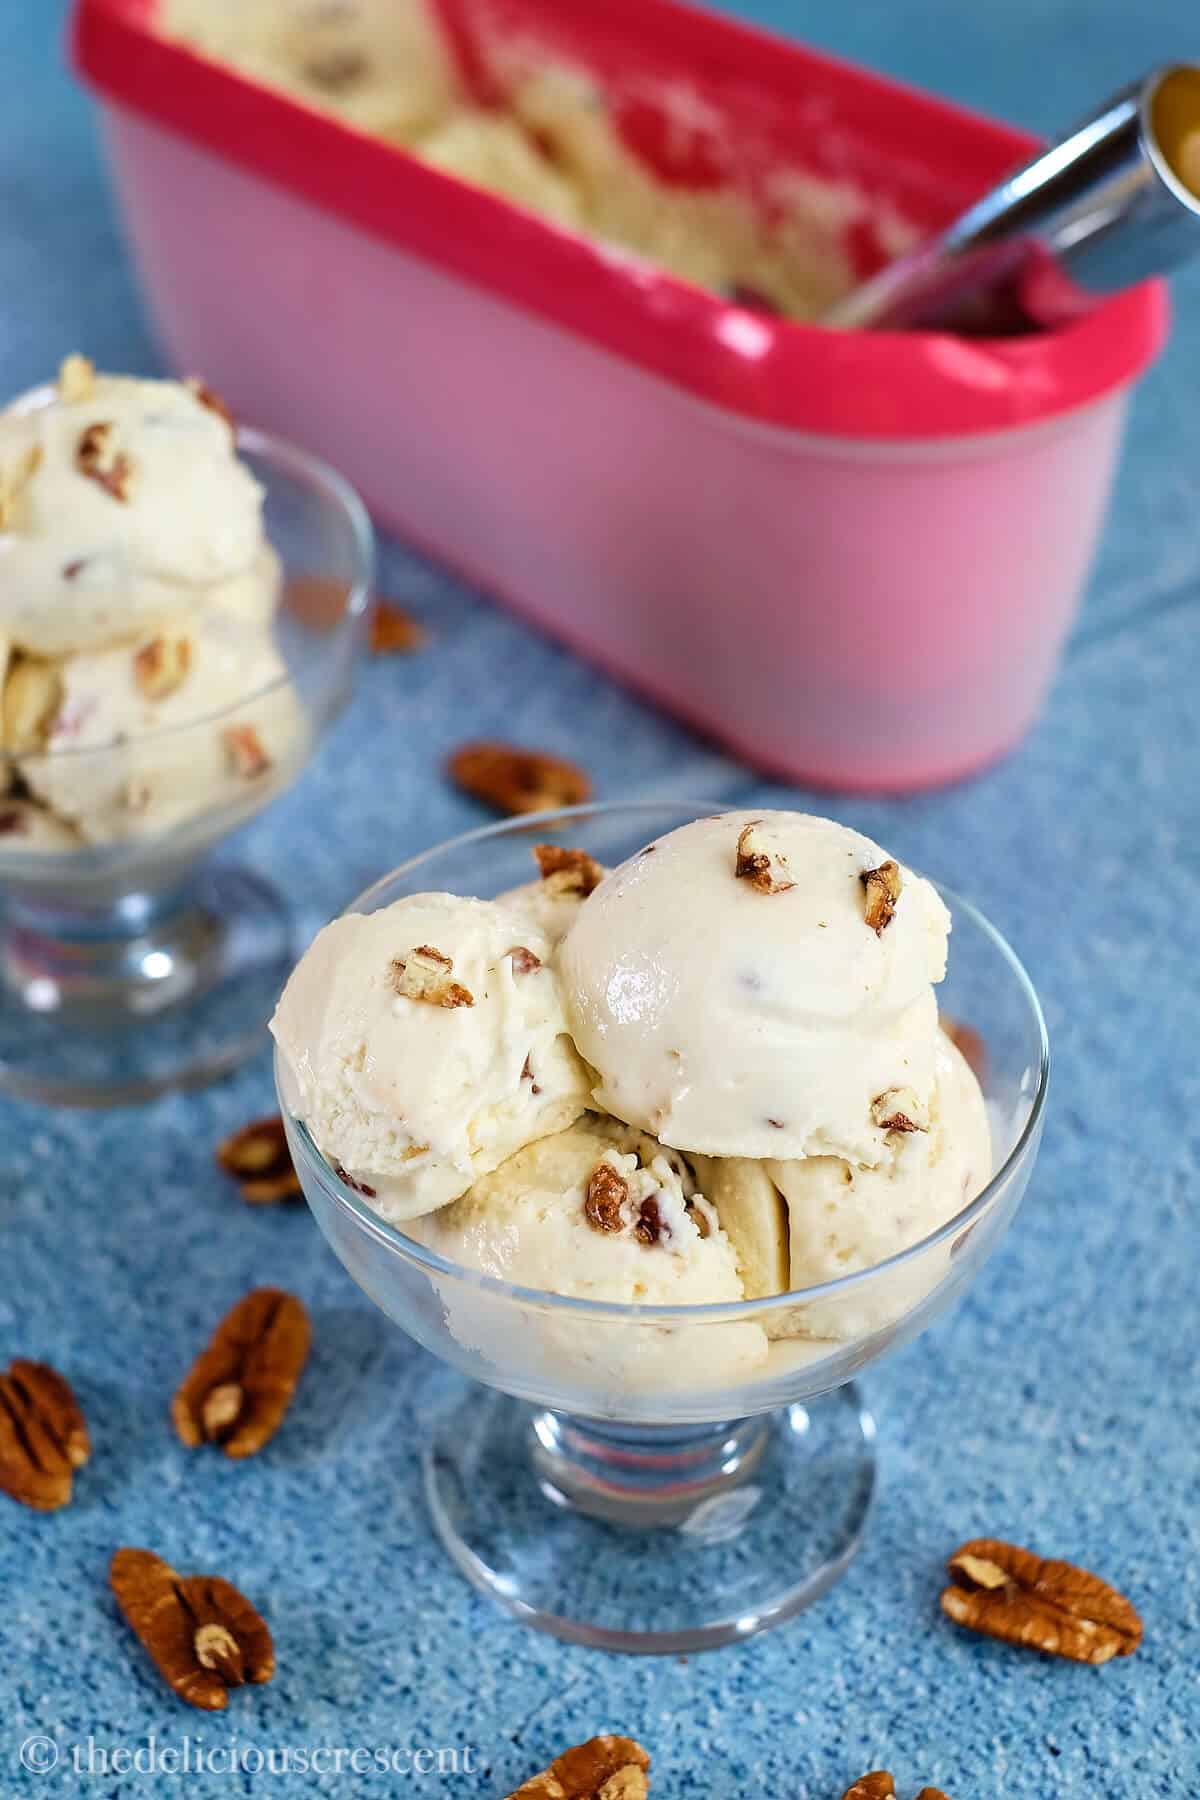 Homemade ice cream in bowl and tub.